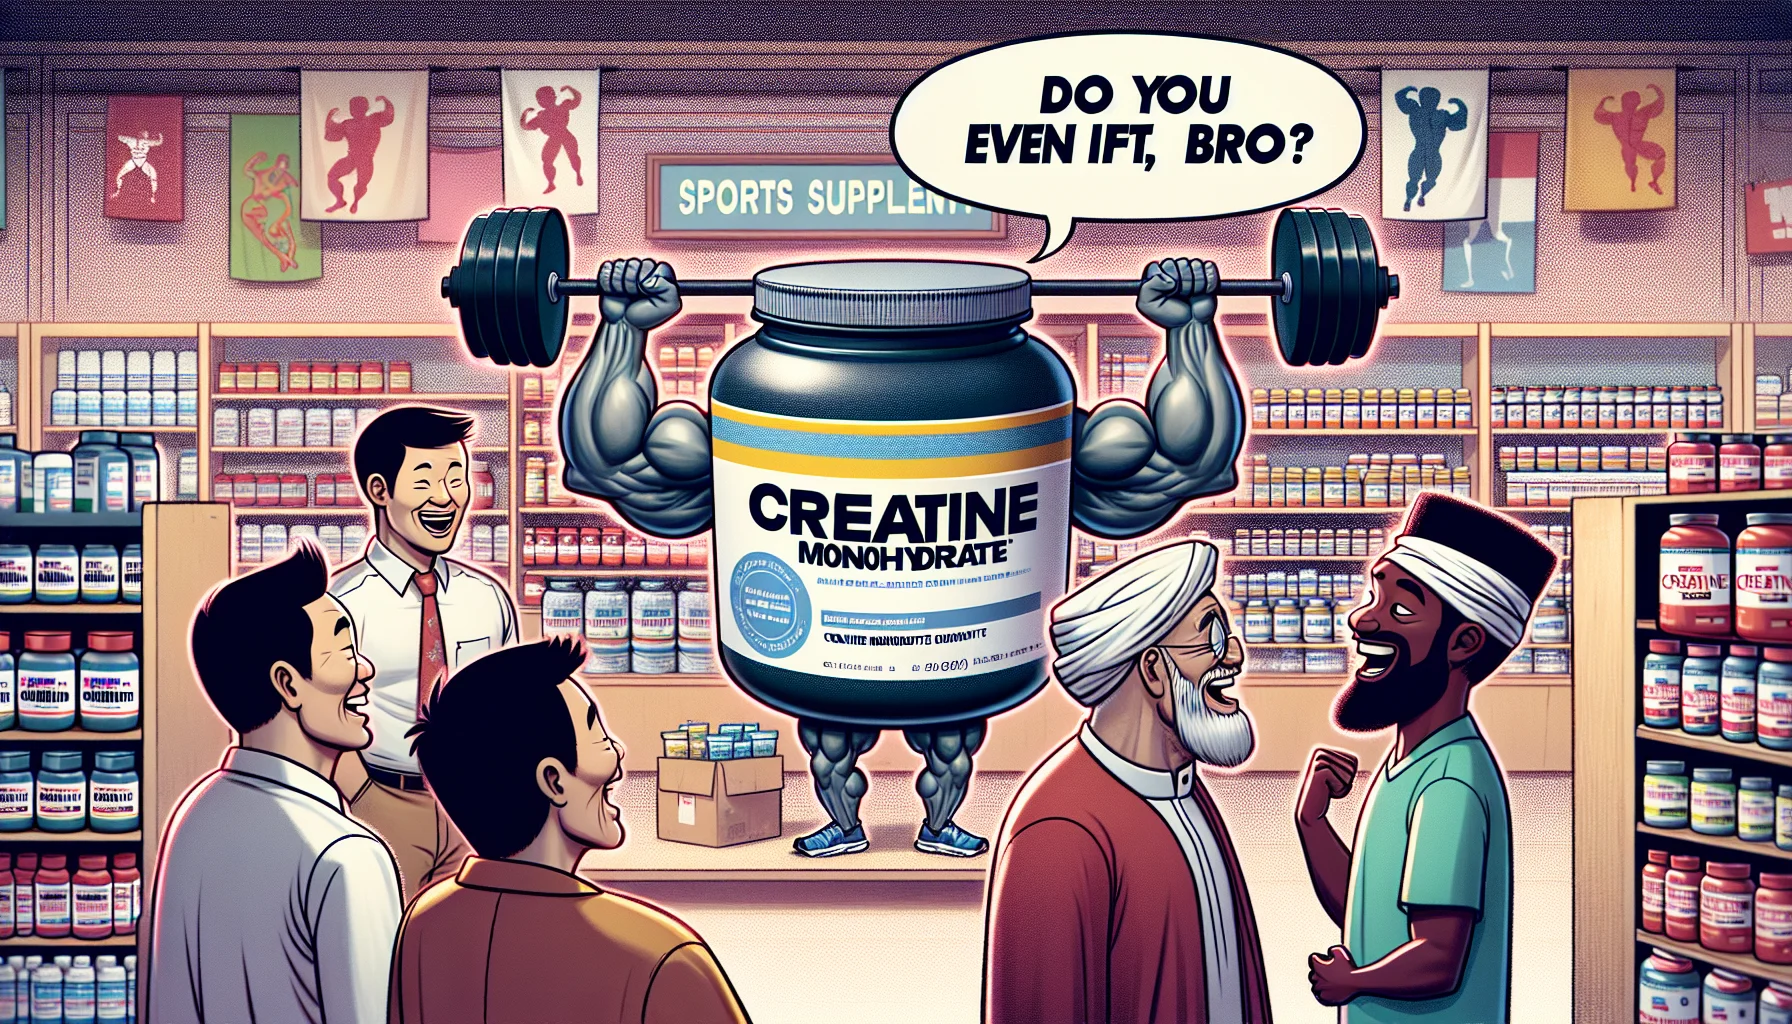 Let's envision a humorous scene taking place in a generic sports supplement store. The central focus is a jumbo-sized tub of Creatine Monohydrate. Adapted cartoon-style muscular arms and legs are hilariously bursting from either side of the container, as it poses a weightlifting dumbbell. A laughter-provoking dialogue bubble coming from the container says, 'Do you even lift, bro?'. A variety of multicultural customers (an Asian female bodybuilder, a Hispanic male athlete, a Middle-Eastern elderly gentleman, a Black teenage female athlete) are depicted reacting with laughter and surprise. The scene subtly communicates the benefits of supplements for sports enthusiasts.